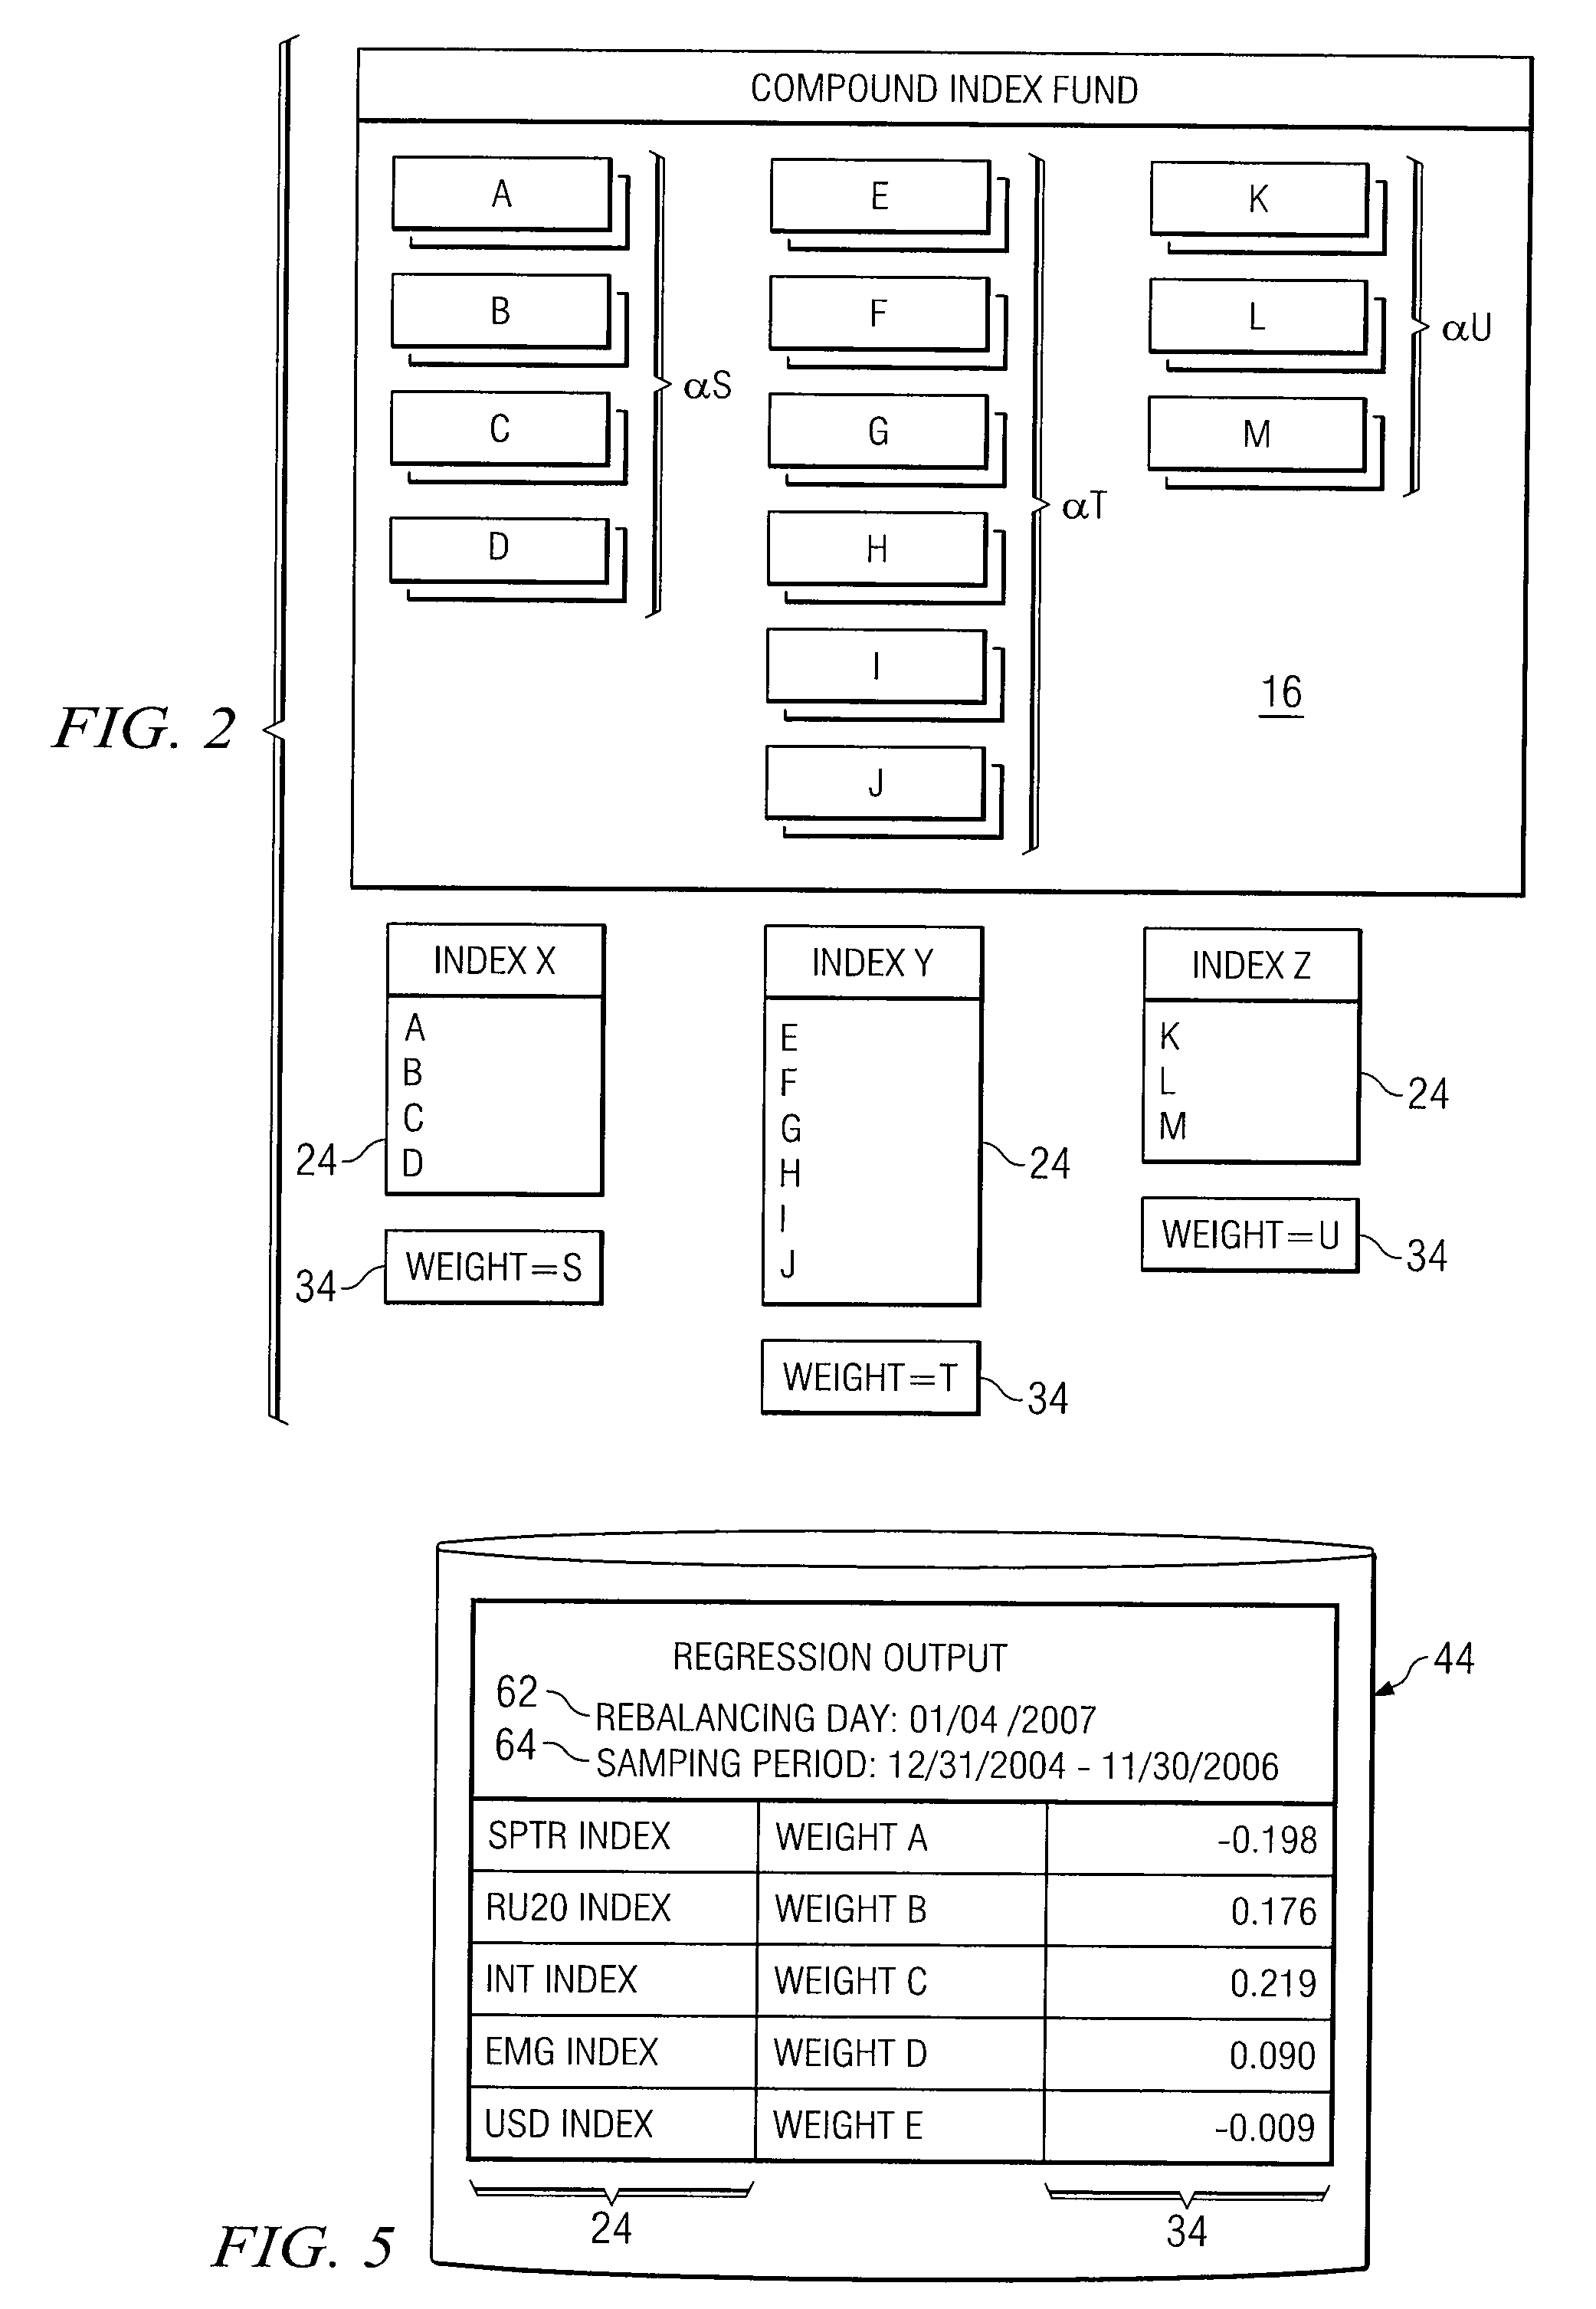 System and method for emulating a long/short hedge fund index in a trading system